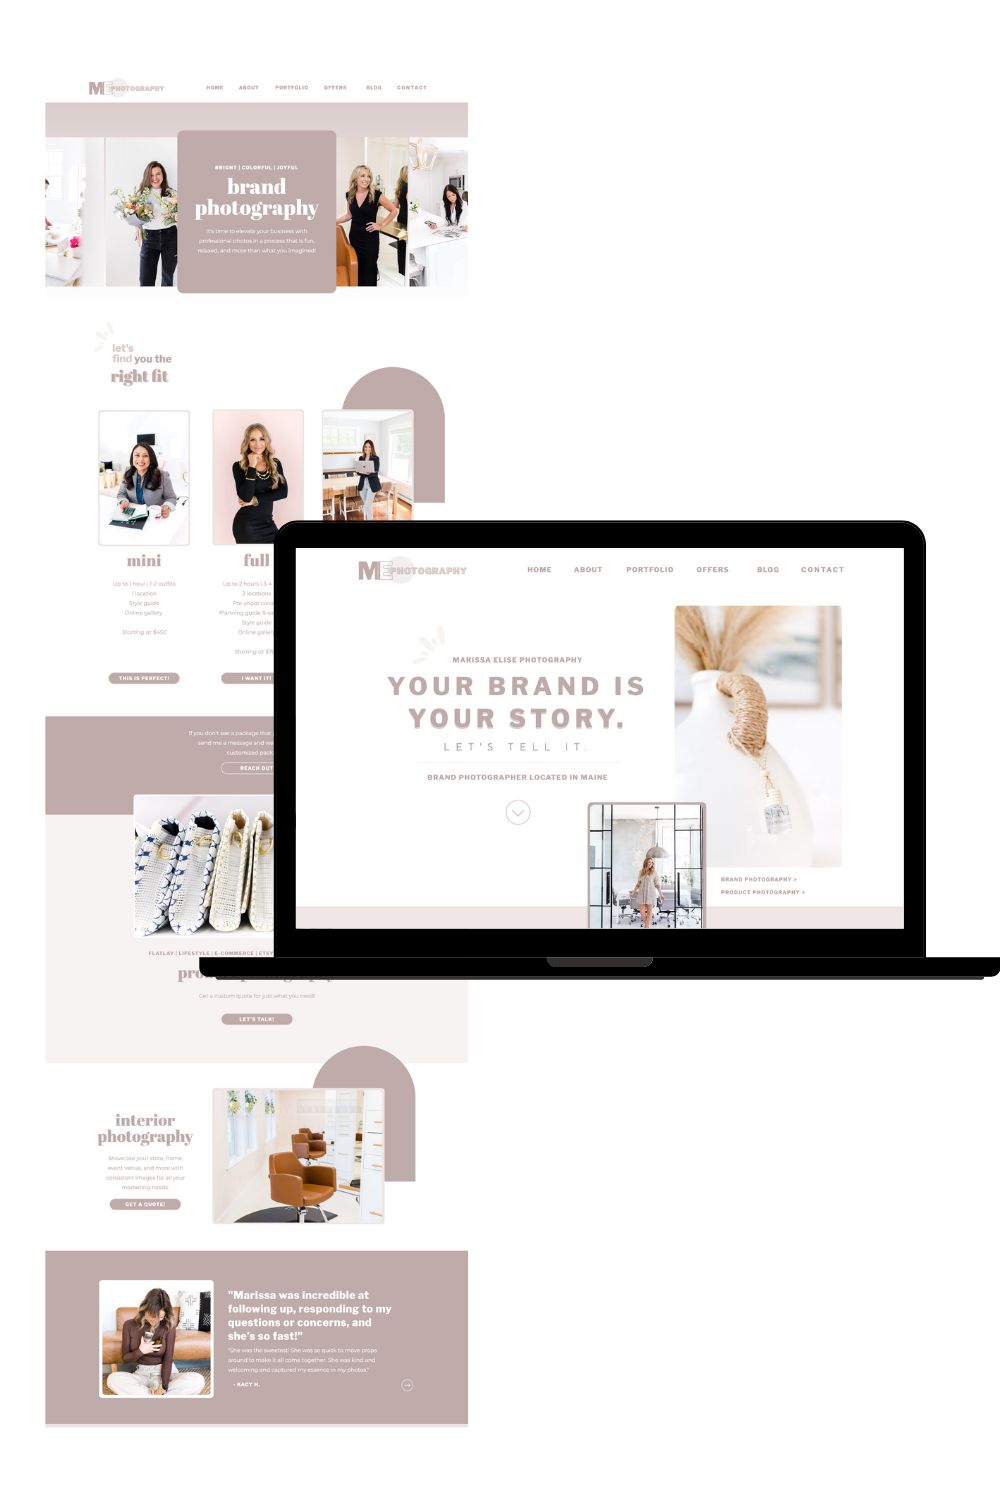 Home and about page for brand photographer Showit website